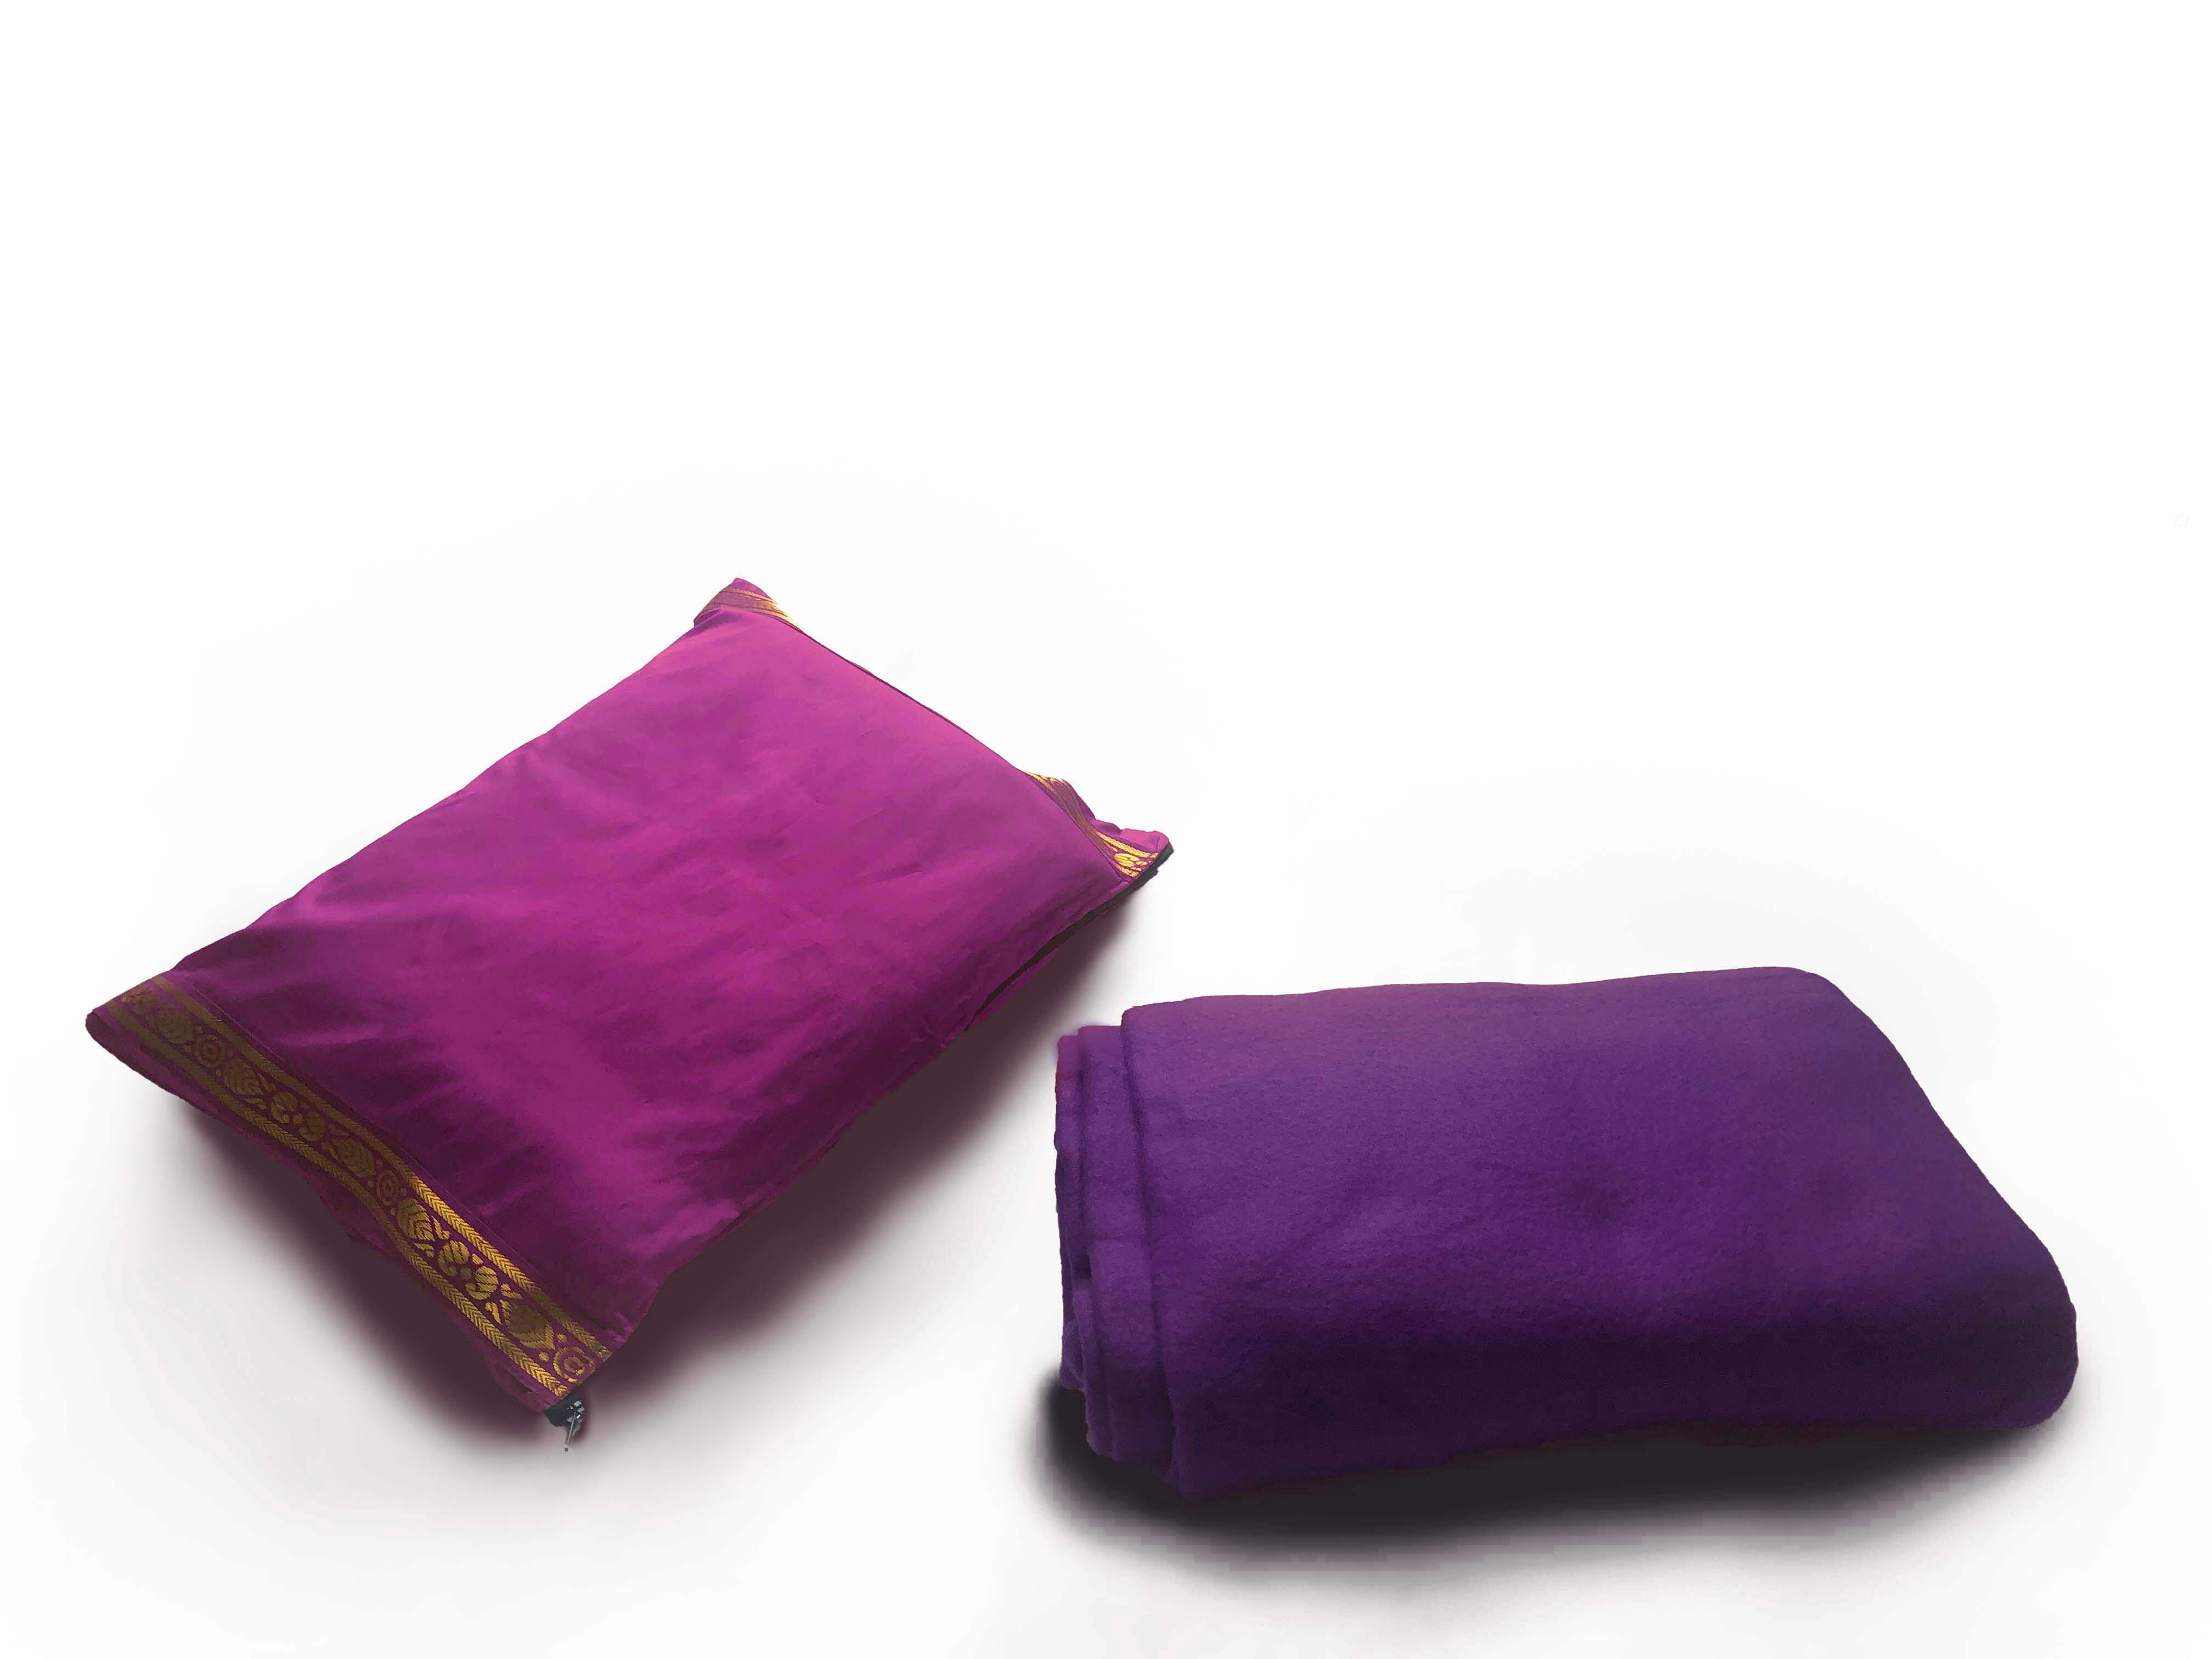 Yoga United Magenta Cushion with blanket pink colour